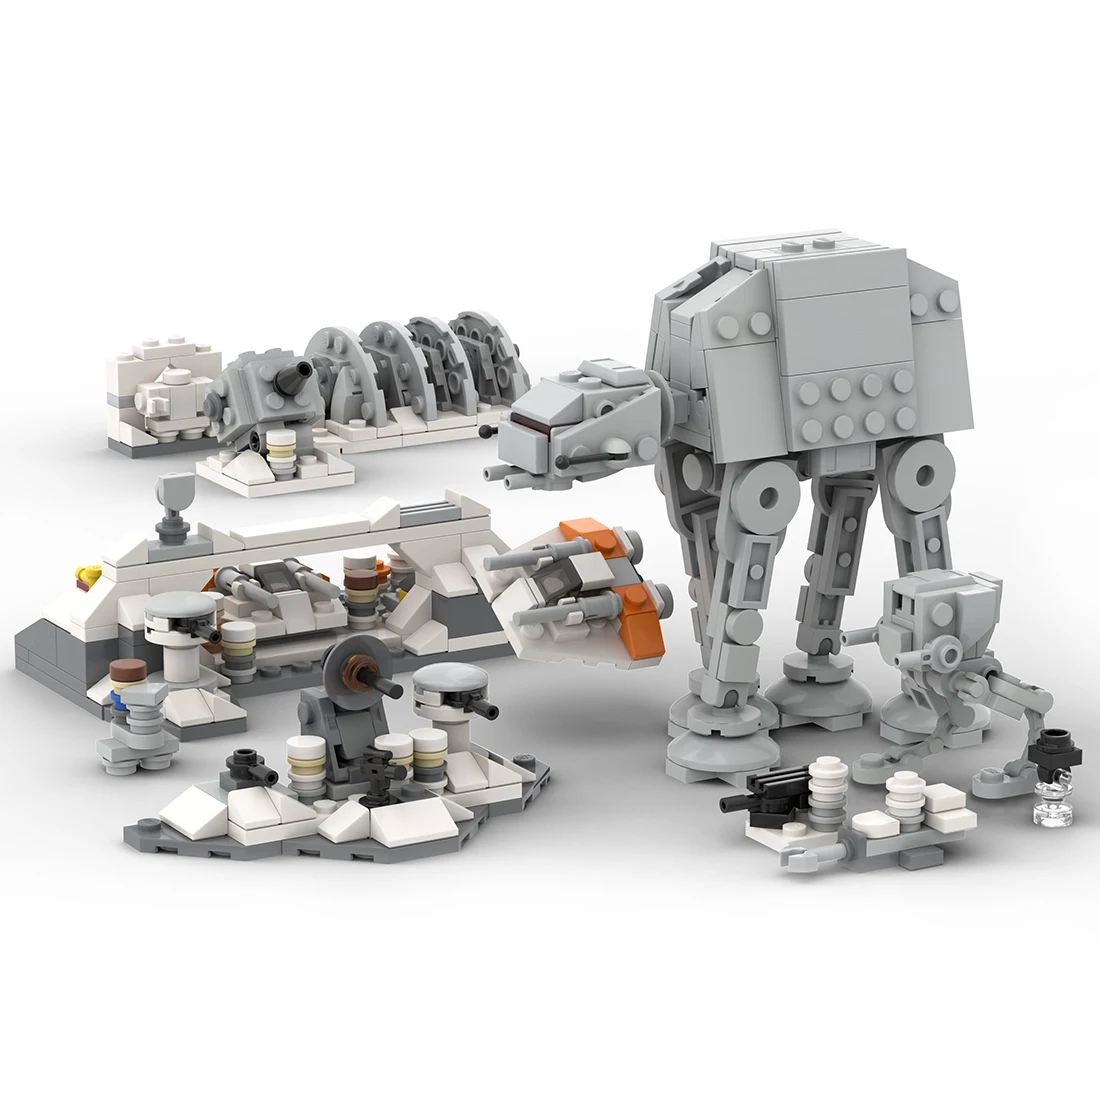 

567Pcs MOC-44946 Micro Assault on Hoth + AT-AT & AT-ST Spaceship Model Bricks Kit (Authorized and Designed by Ron_mcphatty)